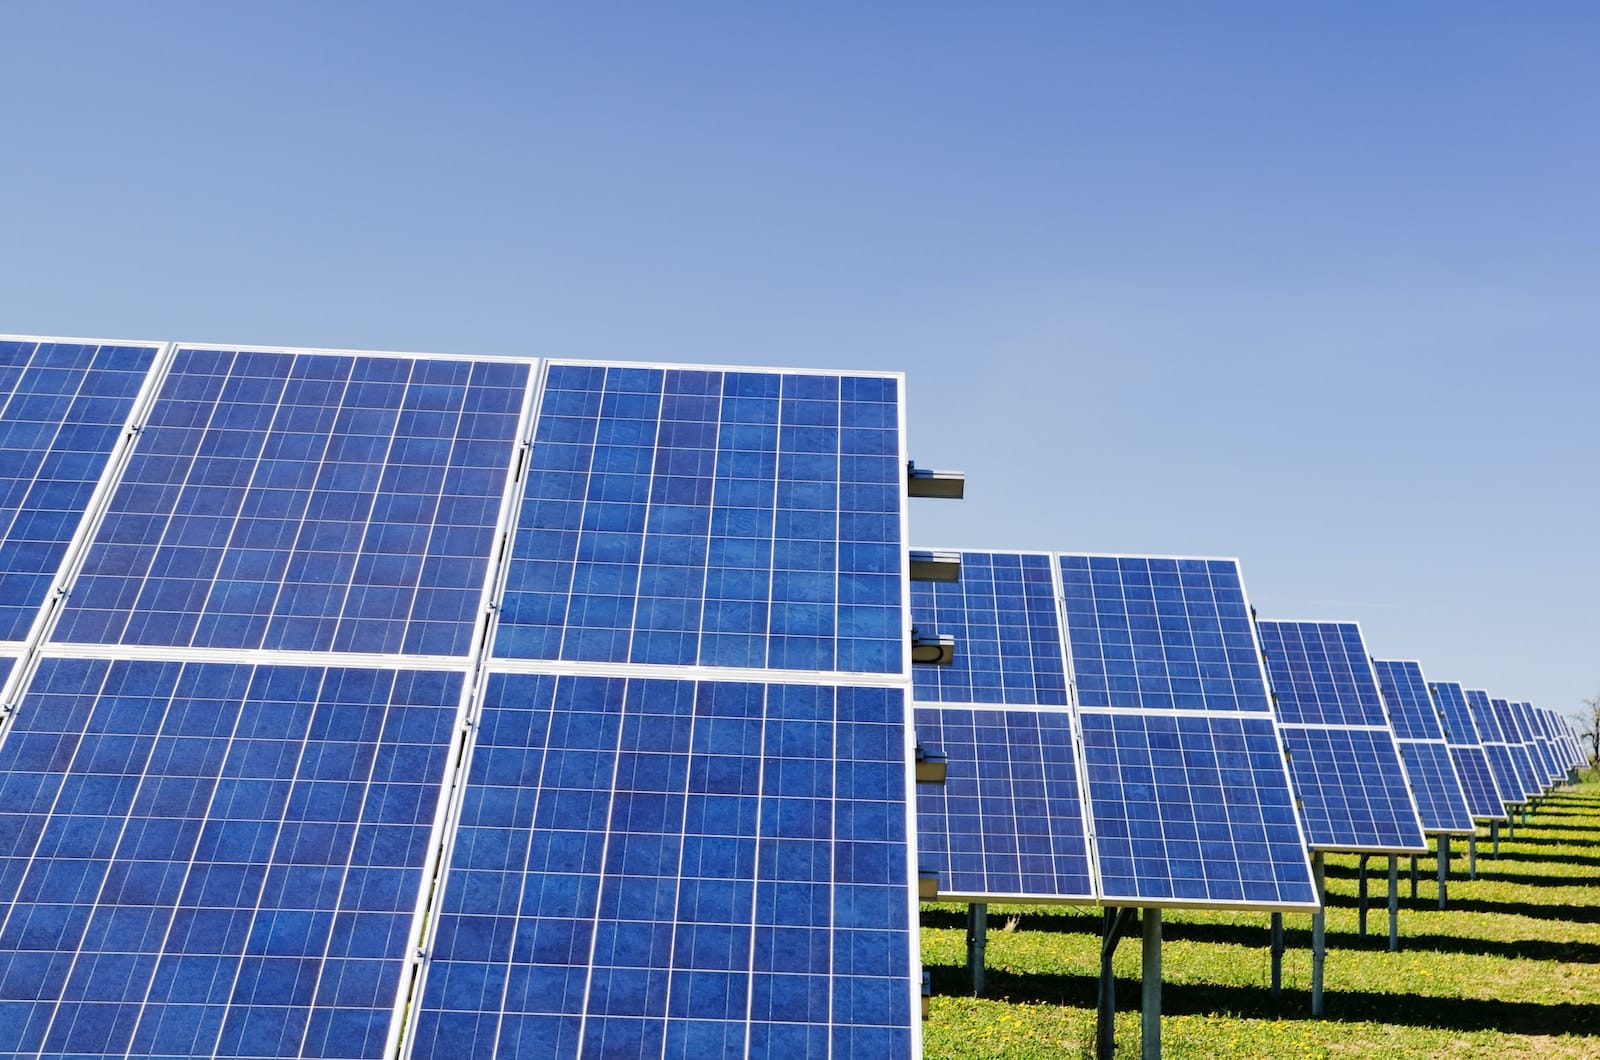 Different Types of Solar Panels